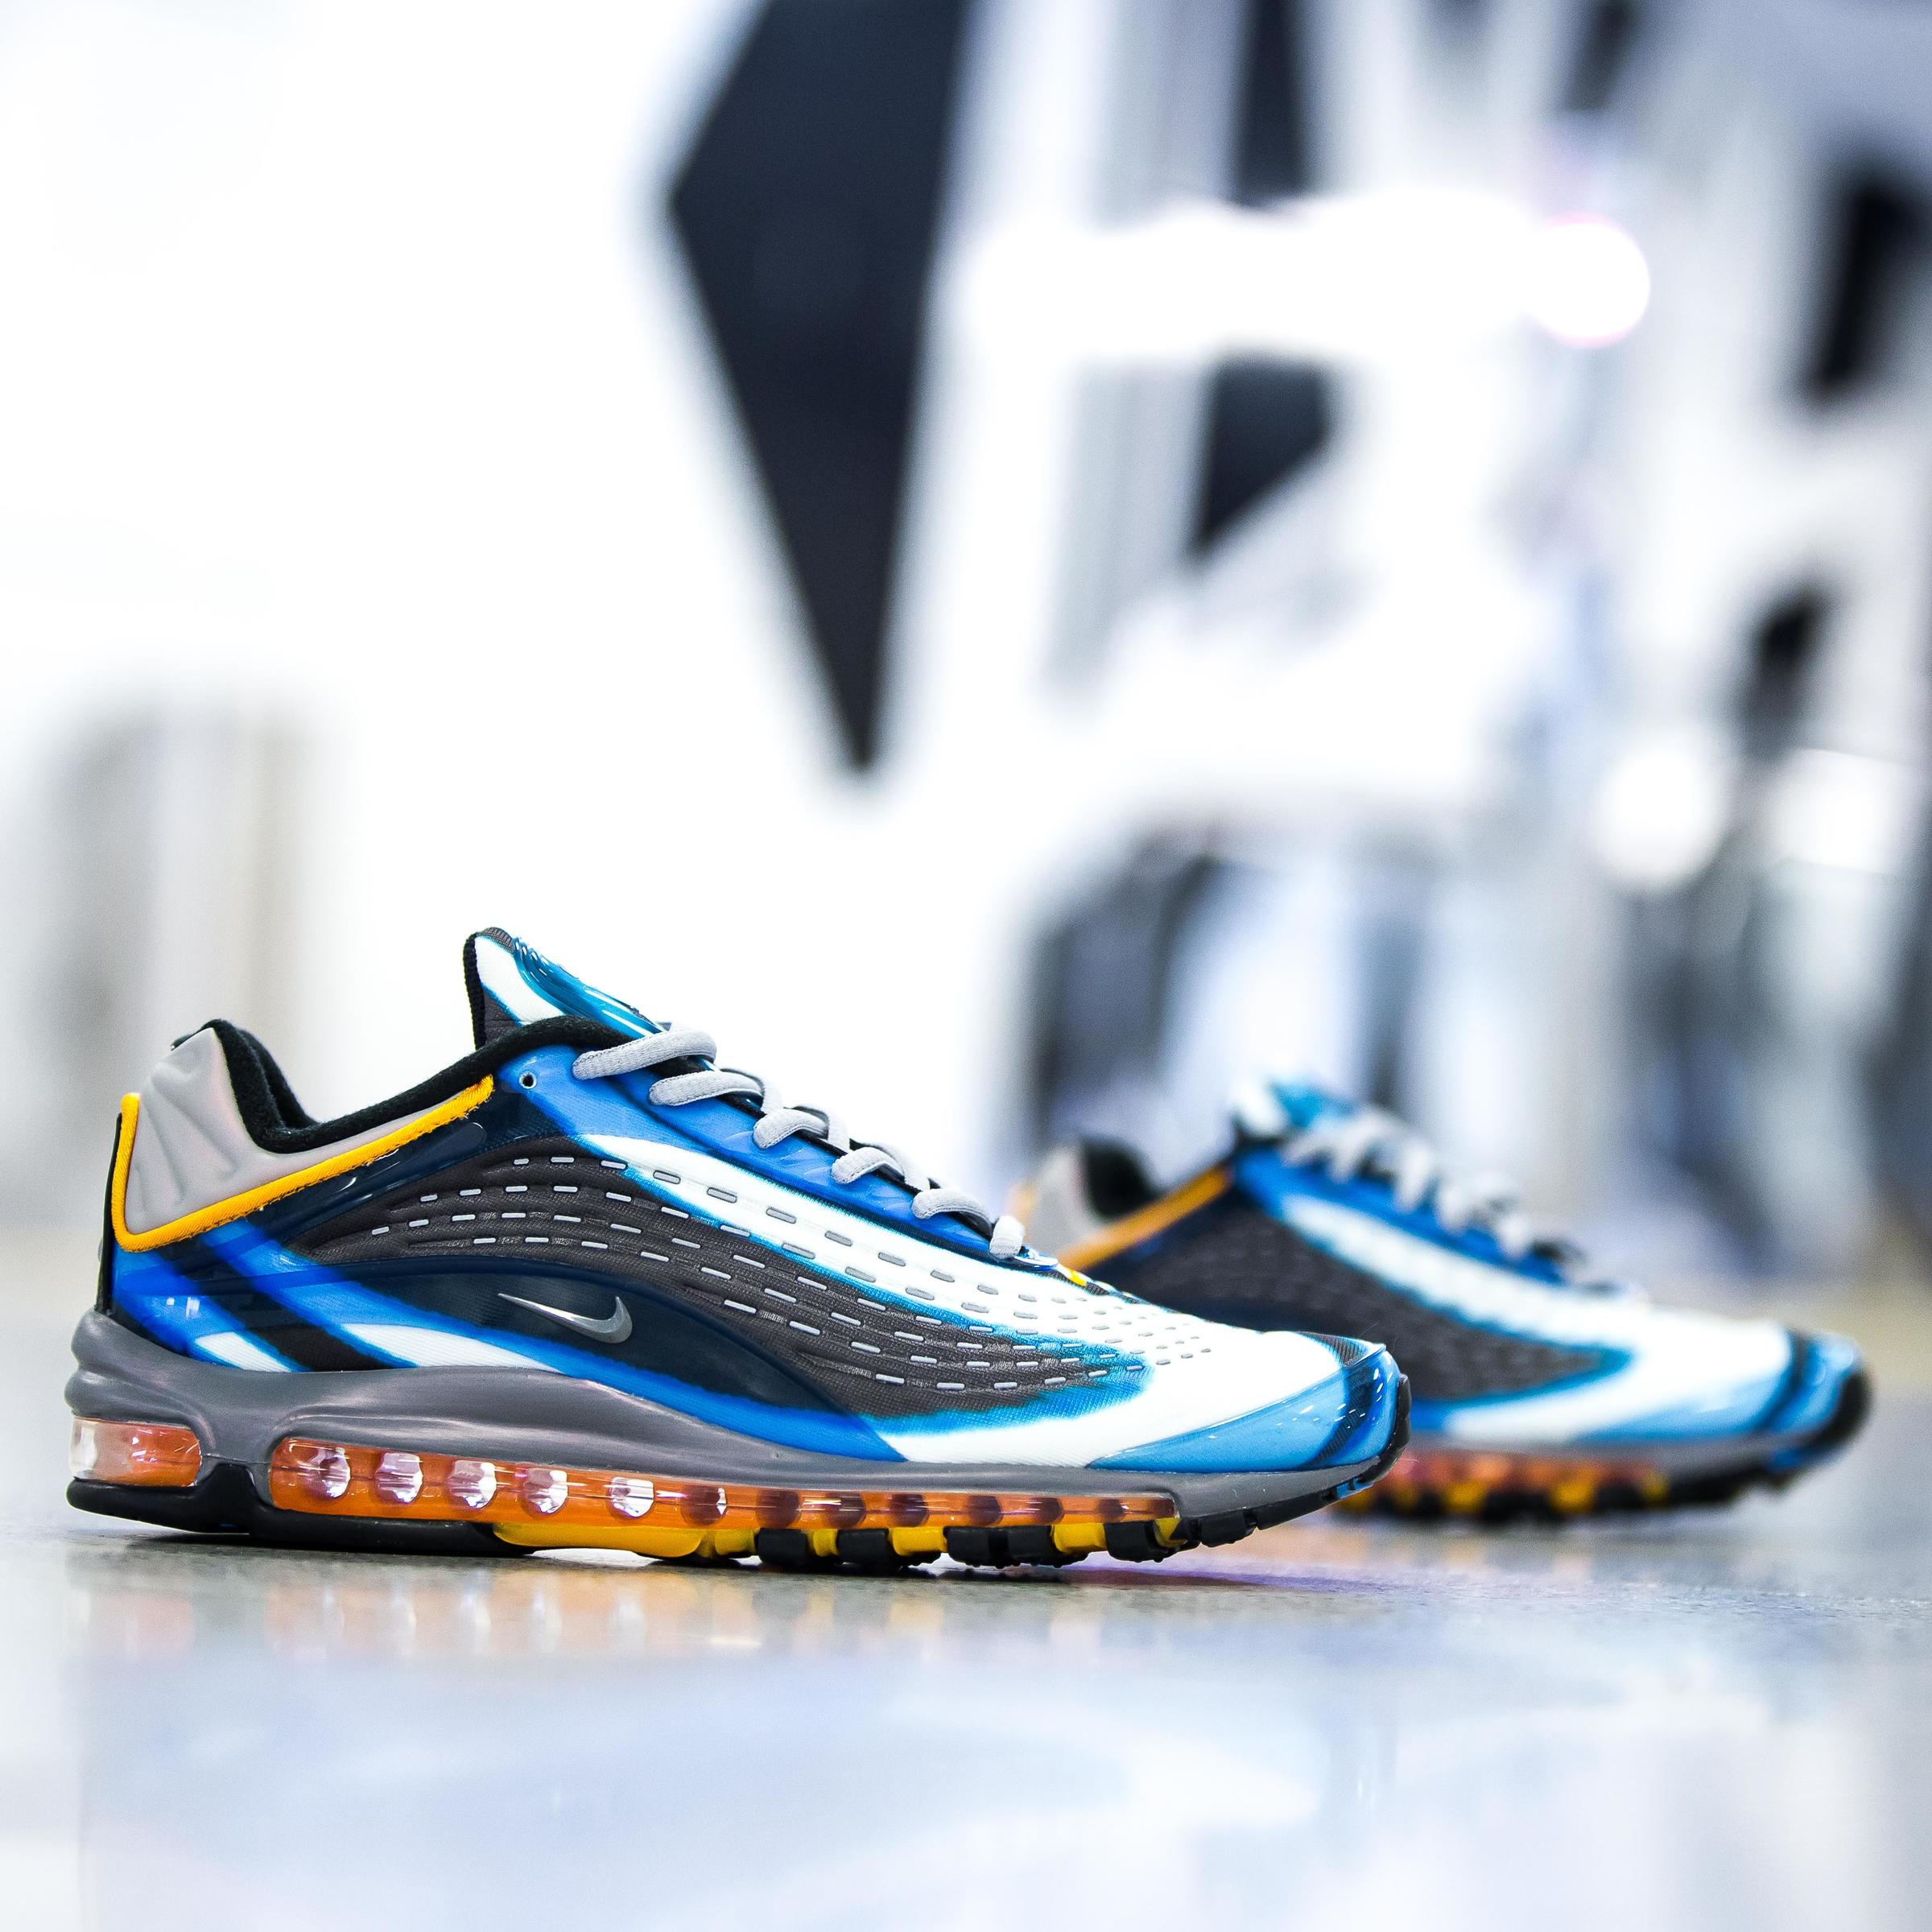 Nike WMNS Air Max Deluxe "Photo Blue"